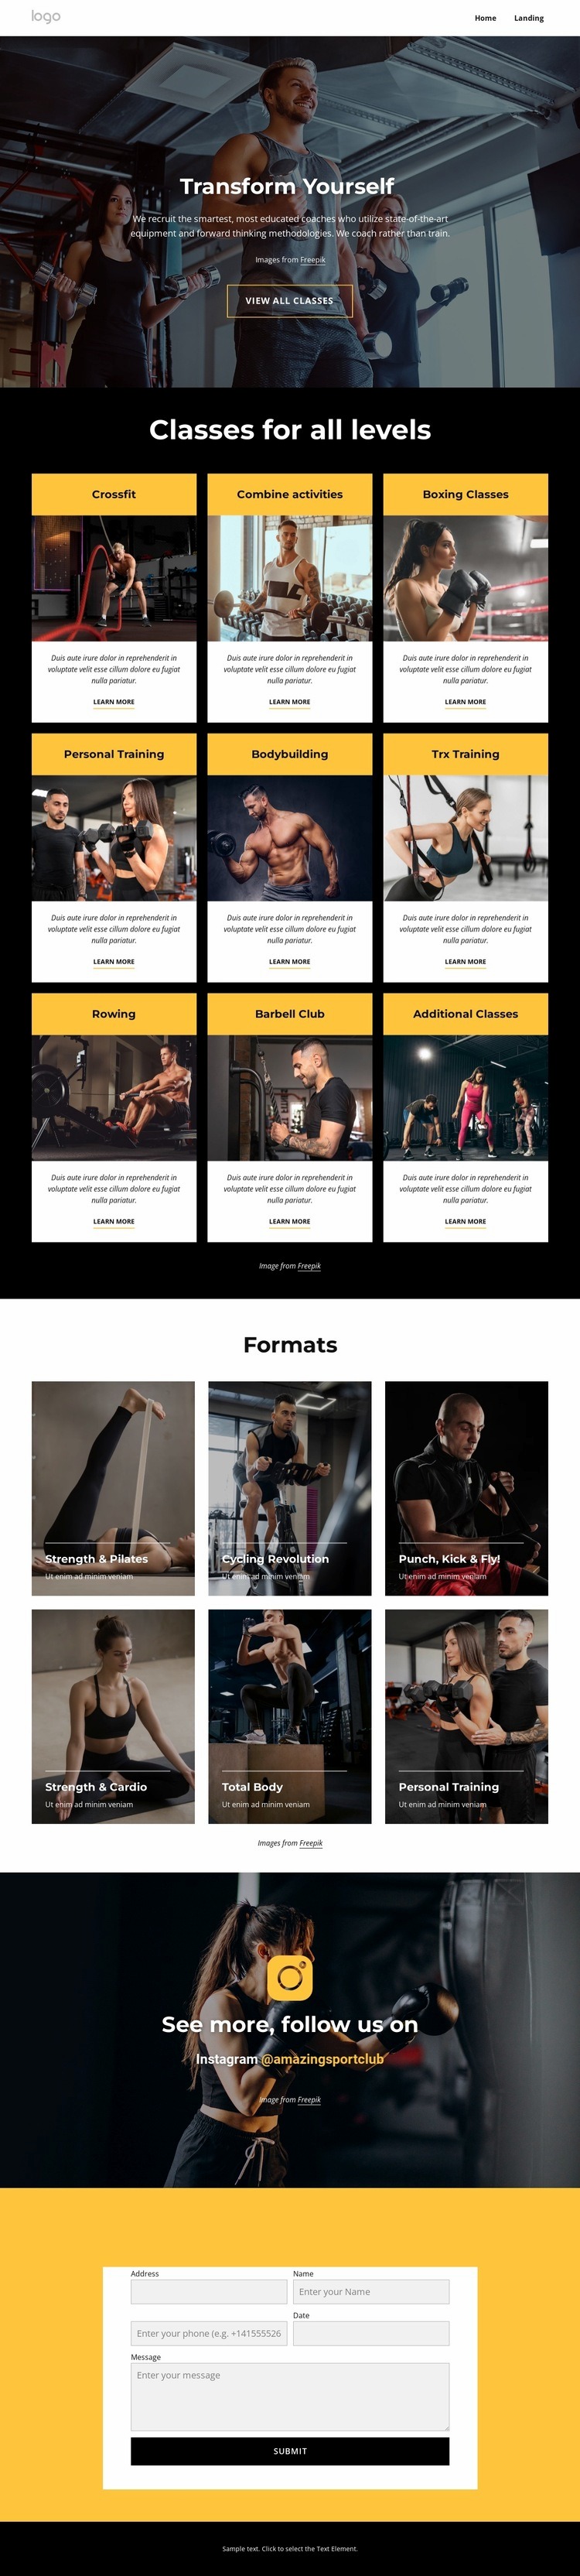 Fitness classes, indoor pools Web Page Design